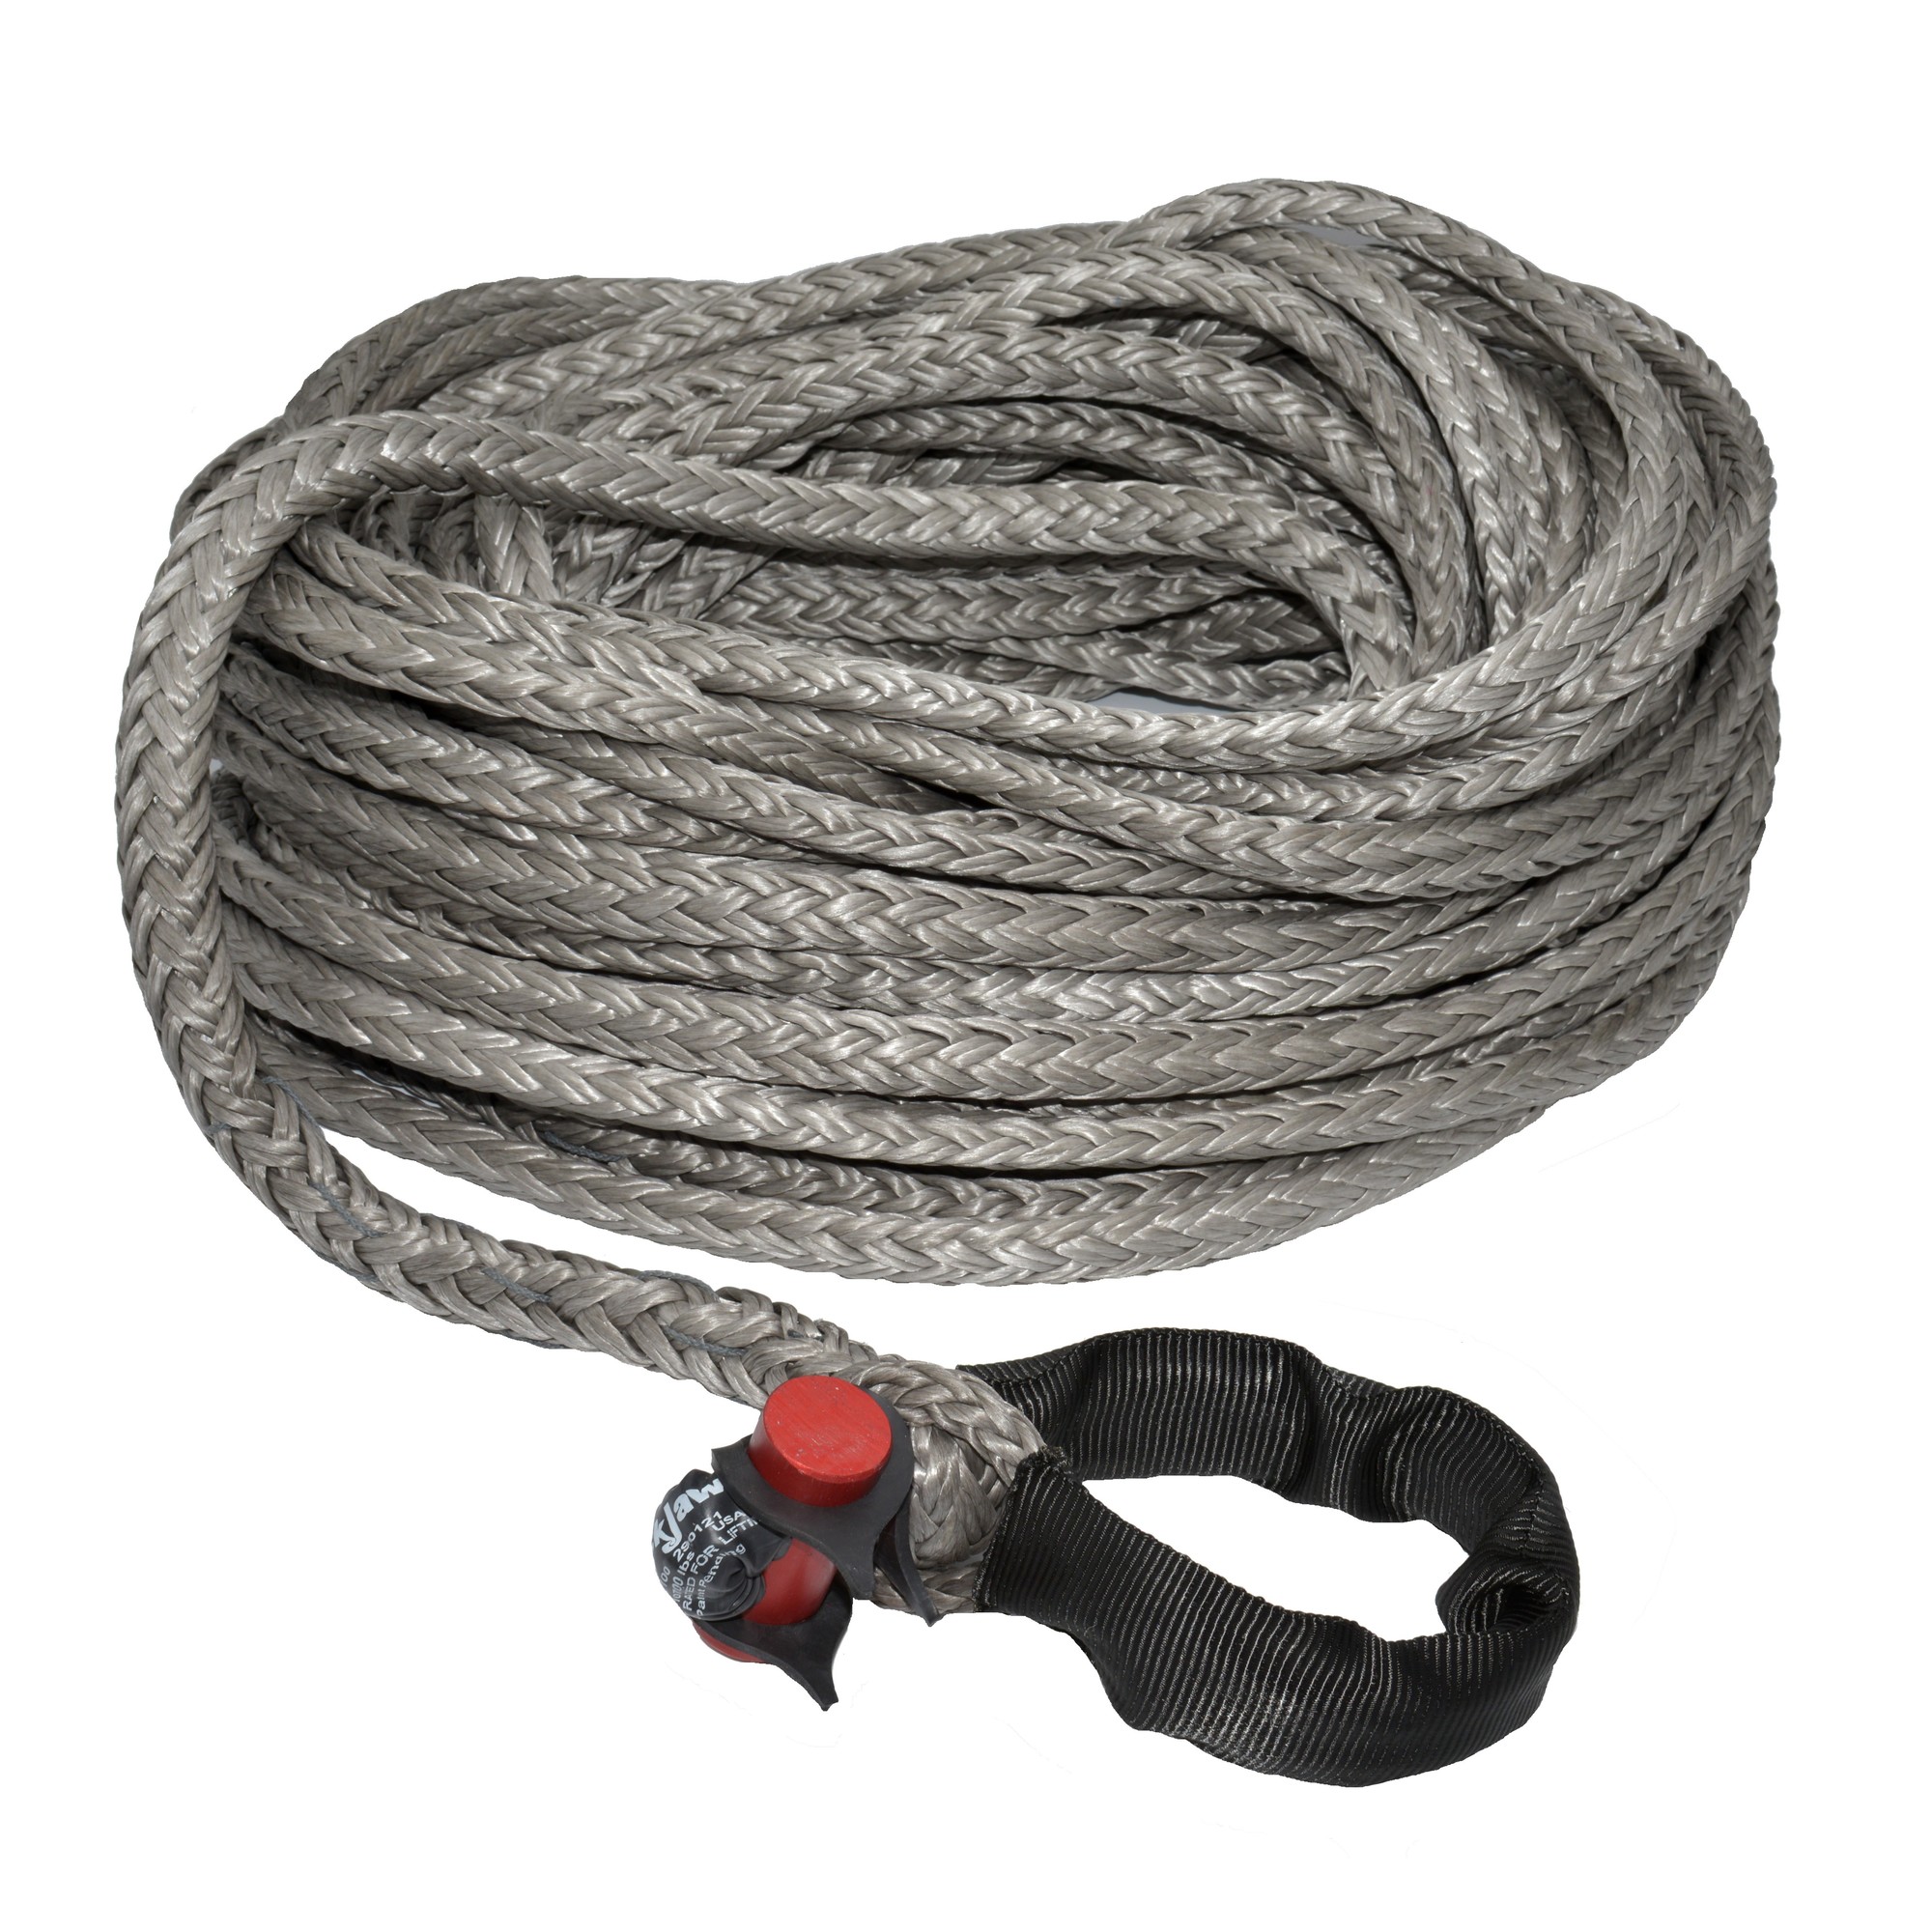 LockJaw, Synthetic Winch Rope Line w/Shackle, Max. Capacity 32100 lb, Length 100 ft, Diameter 1/2 in, Model 20-0500100